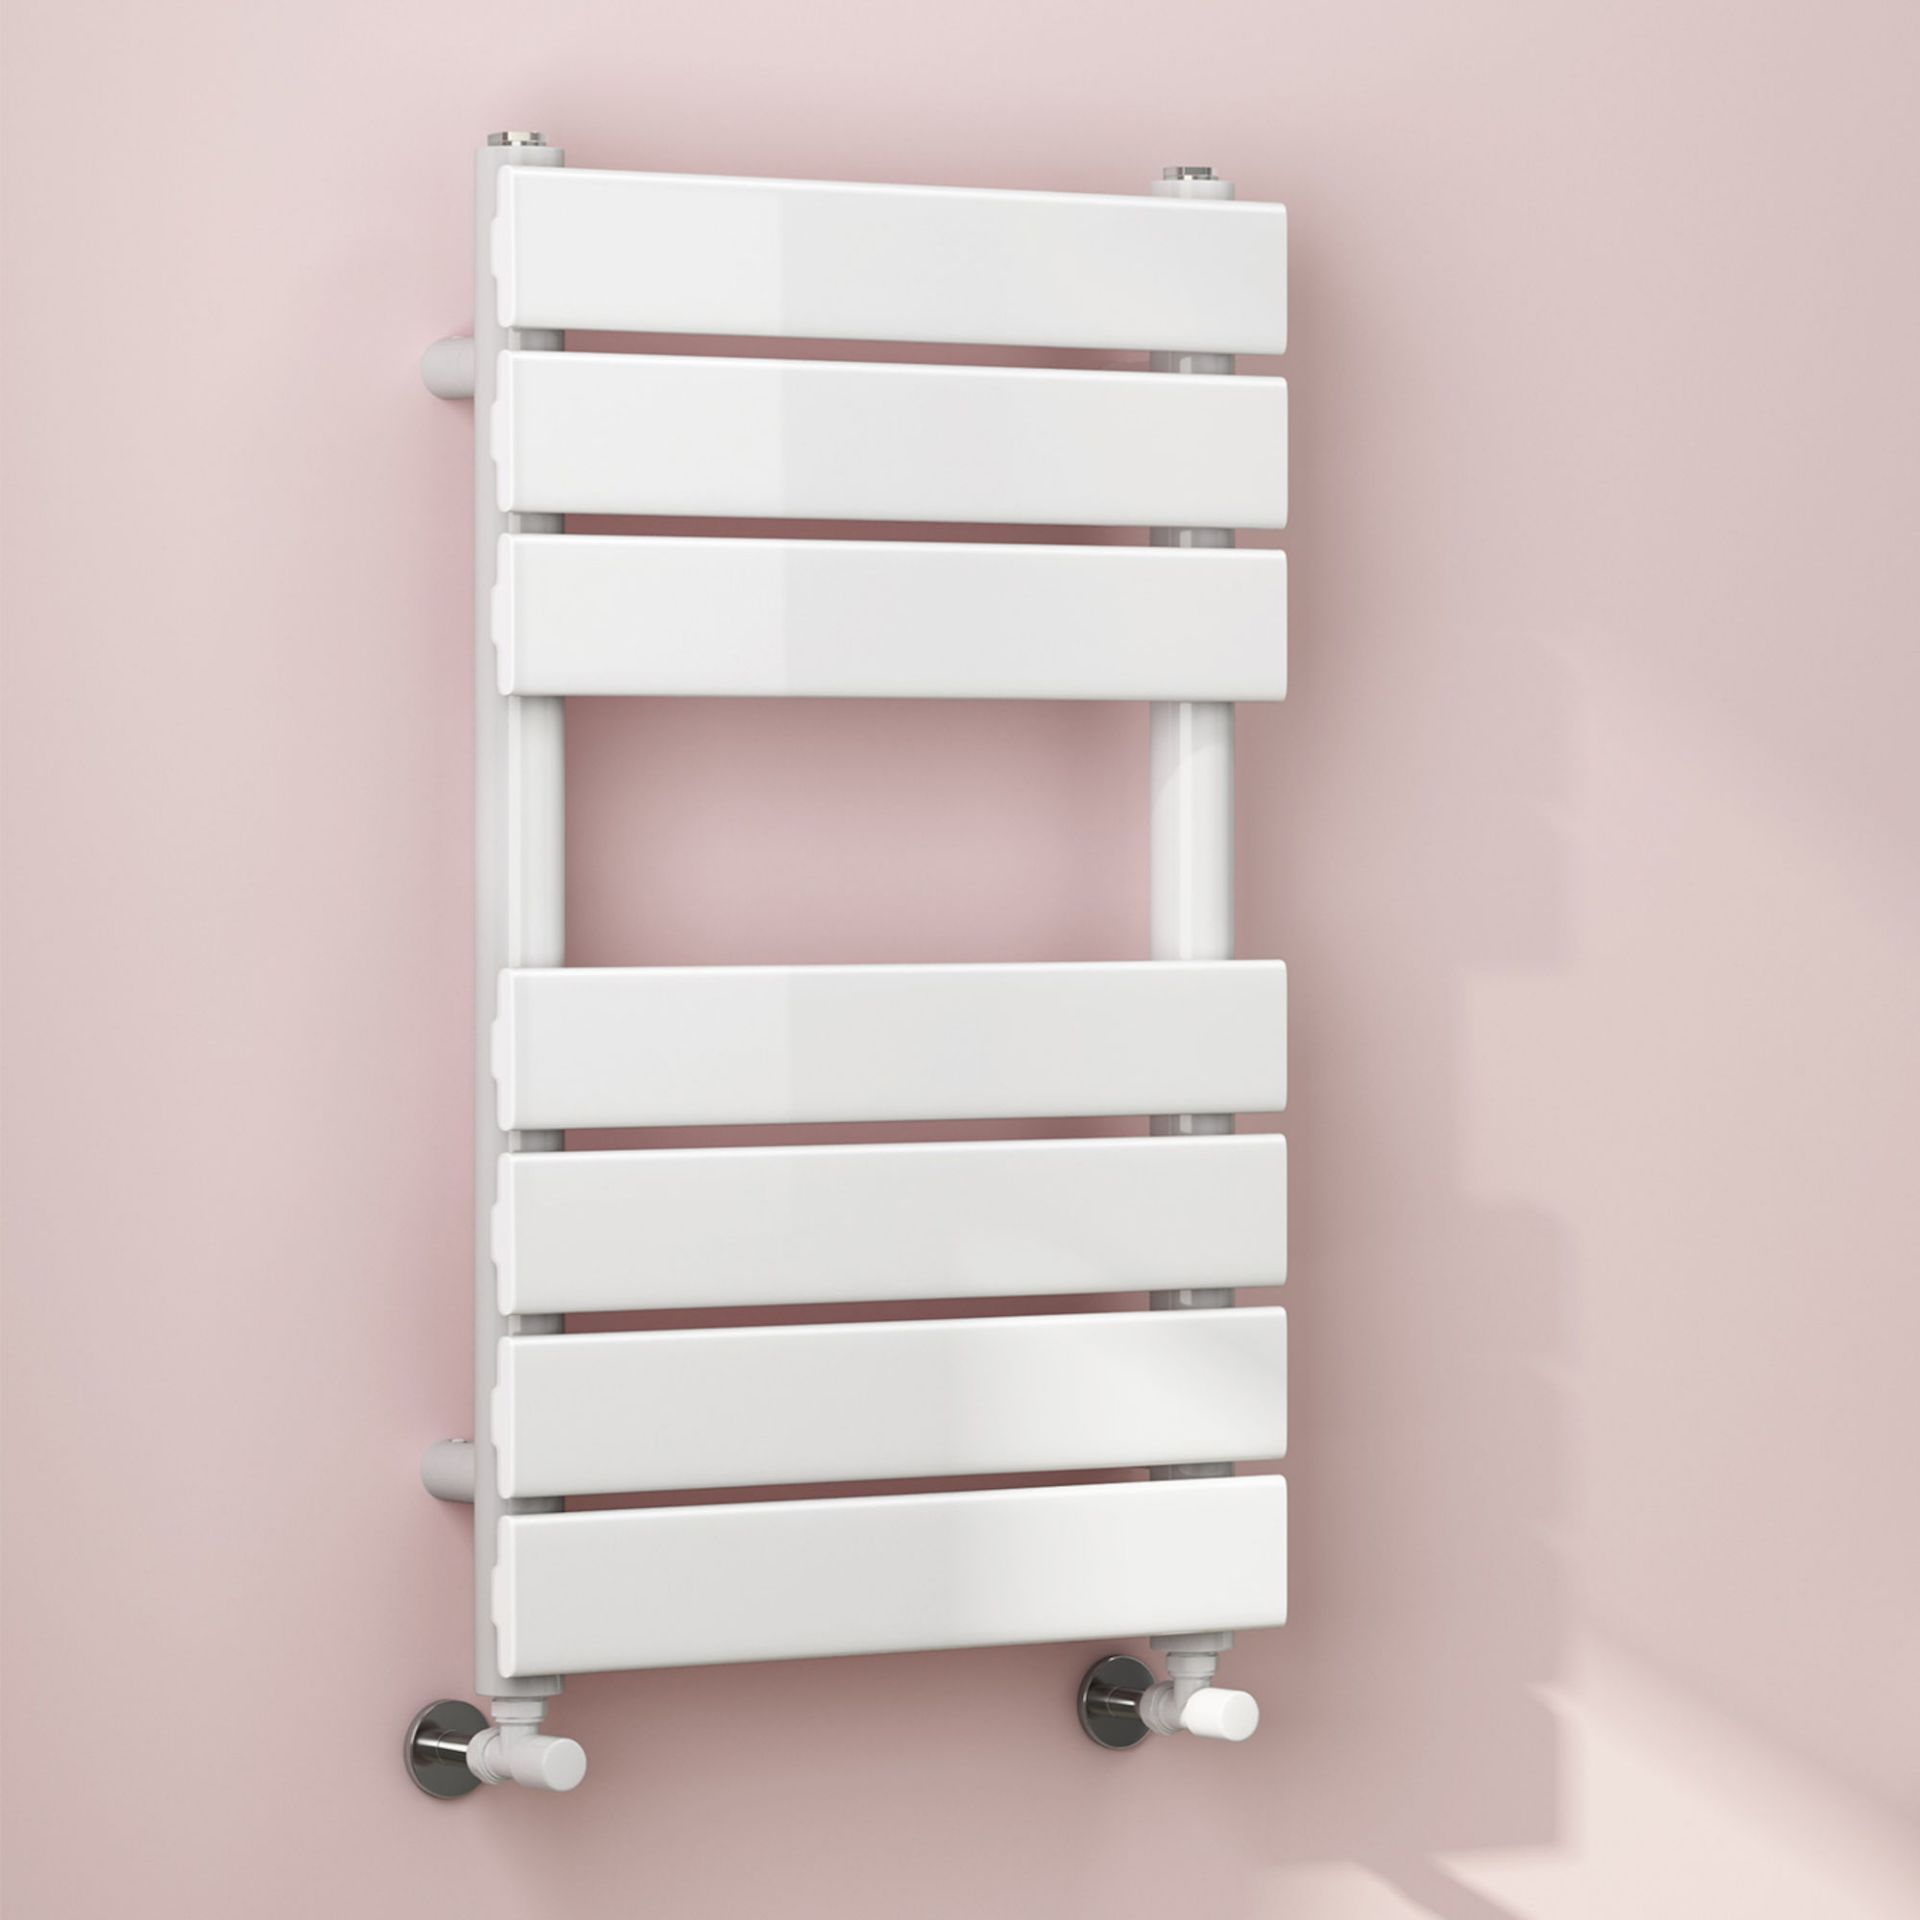 (CS21) 650x400mm White Flat Panel Ladder Towel Radiator. RRP £174.99. Made from low carbon steel